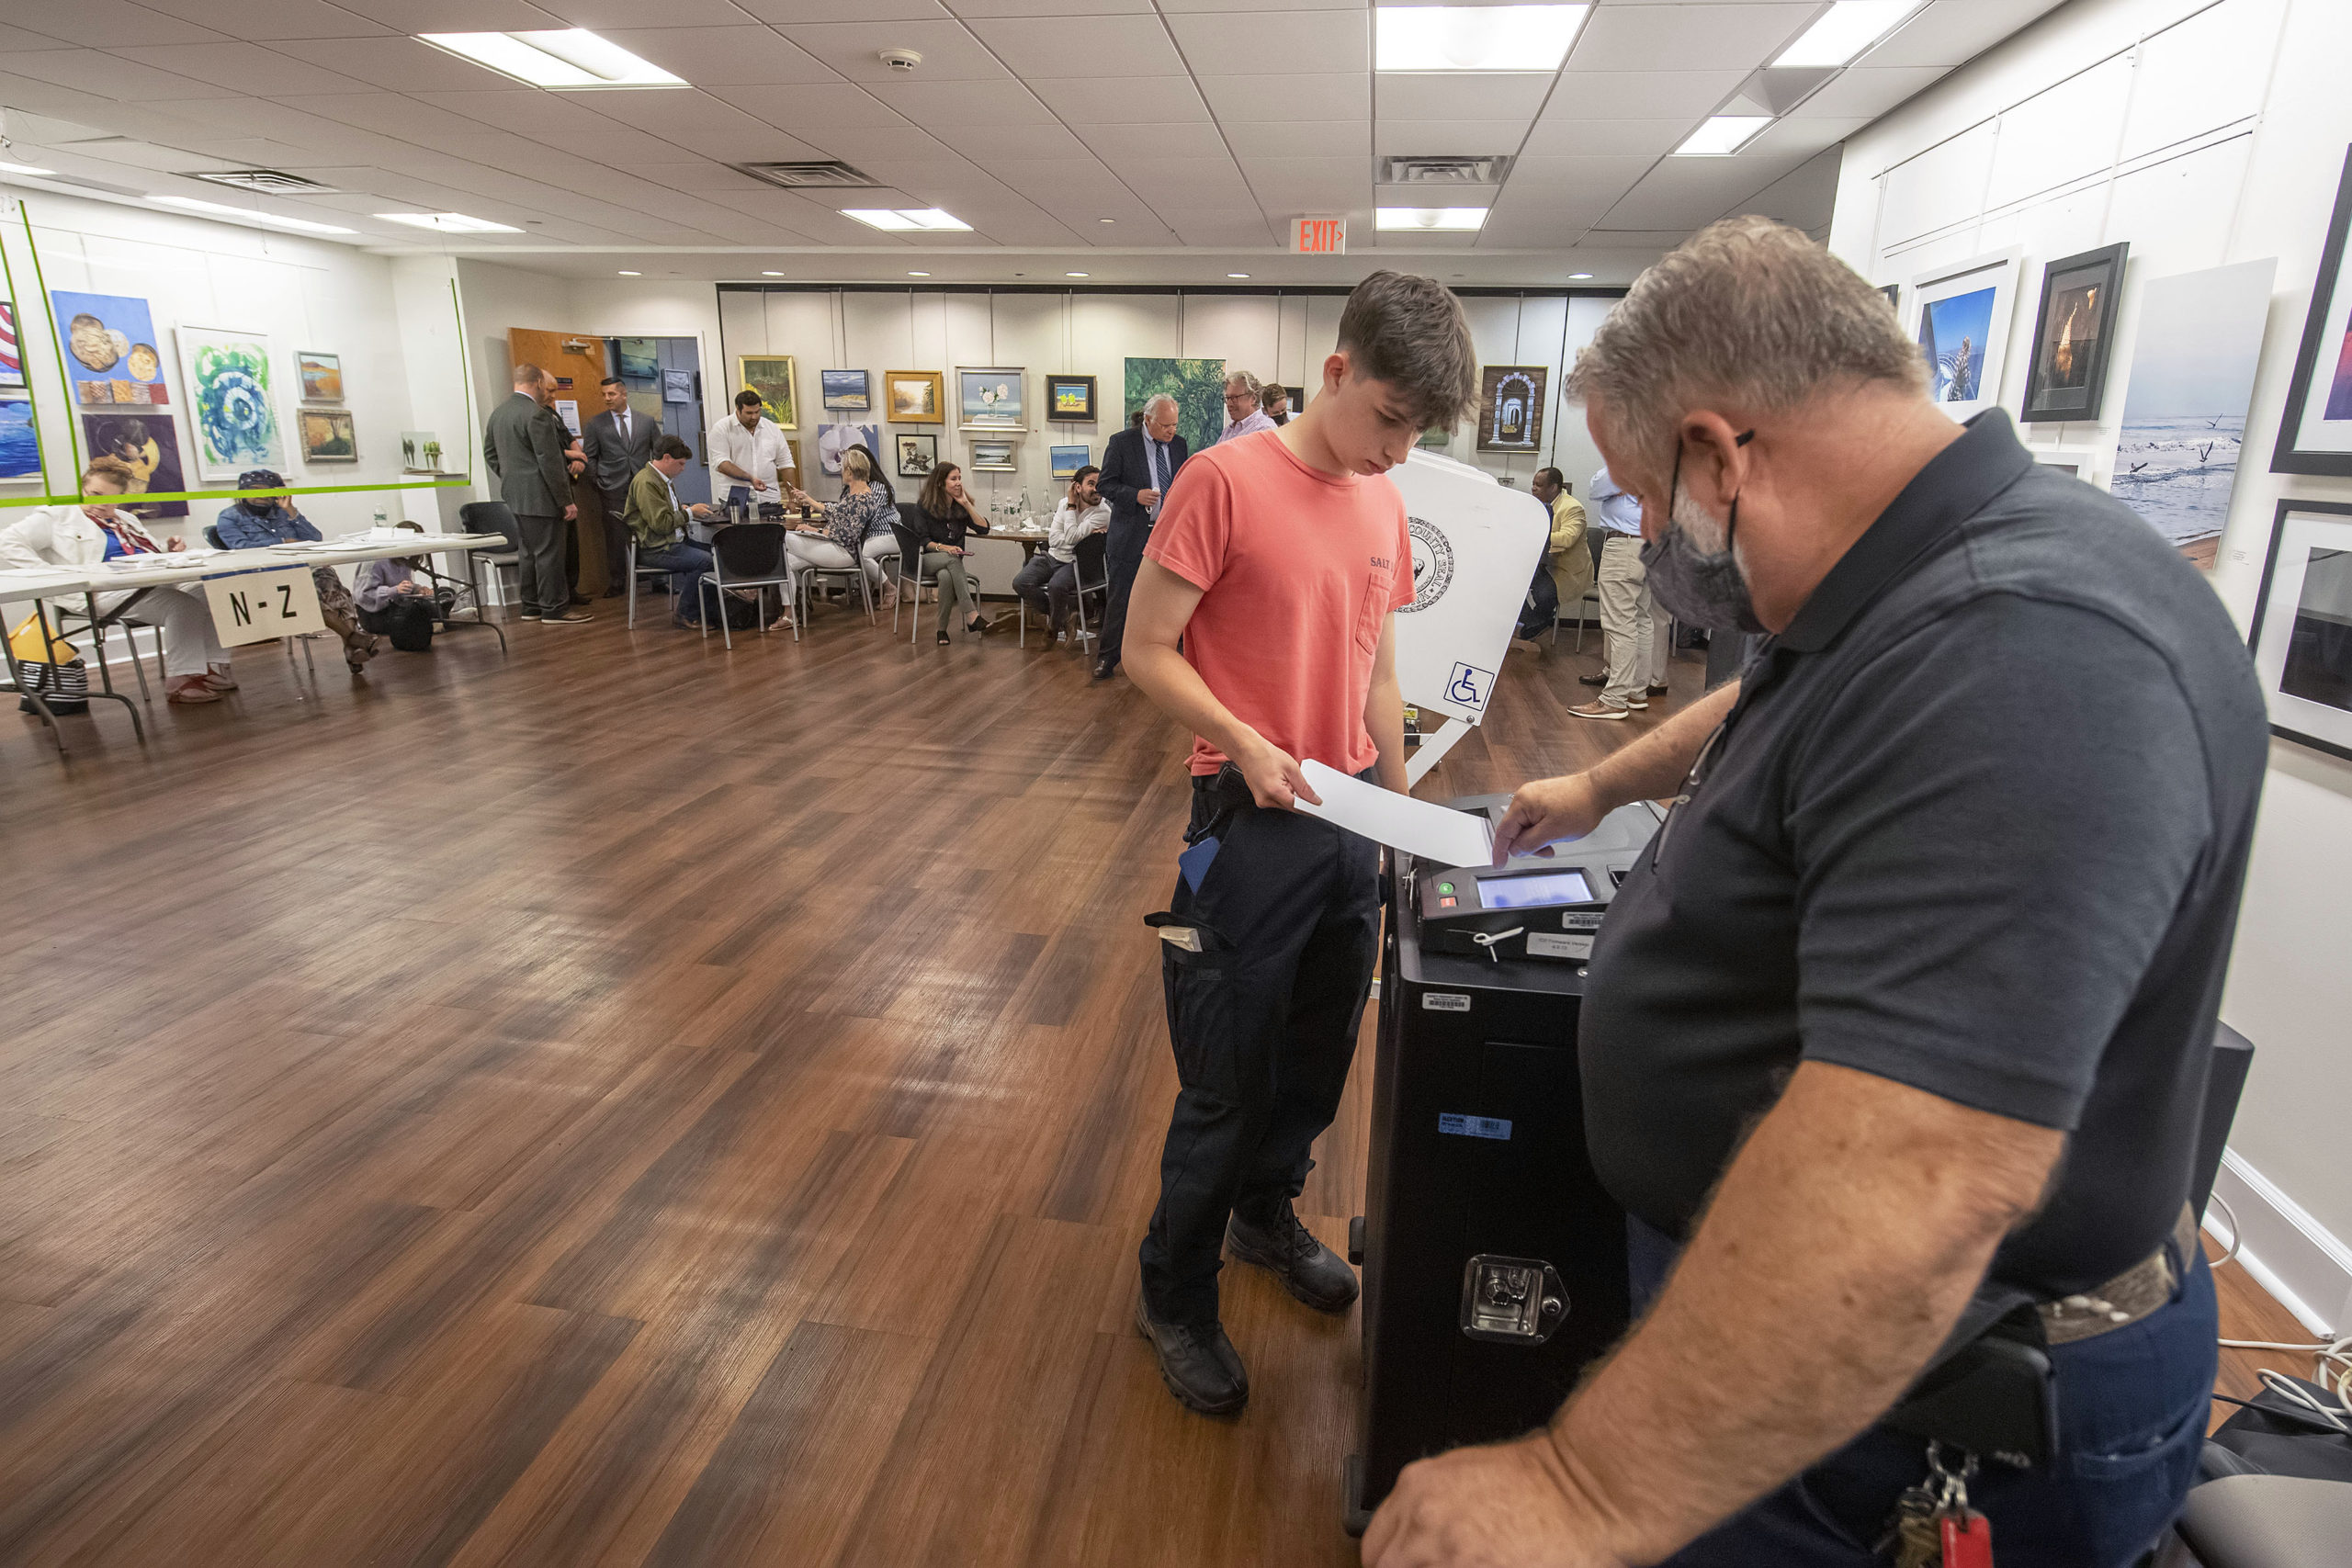 An election official helps a young voter insert his ballot into the voting machine during the 2021 Southampton Village Mayoral election at the Southampton Cultural Center on Friday night. MICHAEL HELLER